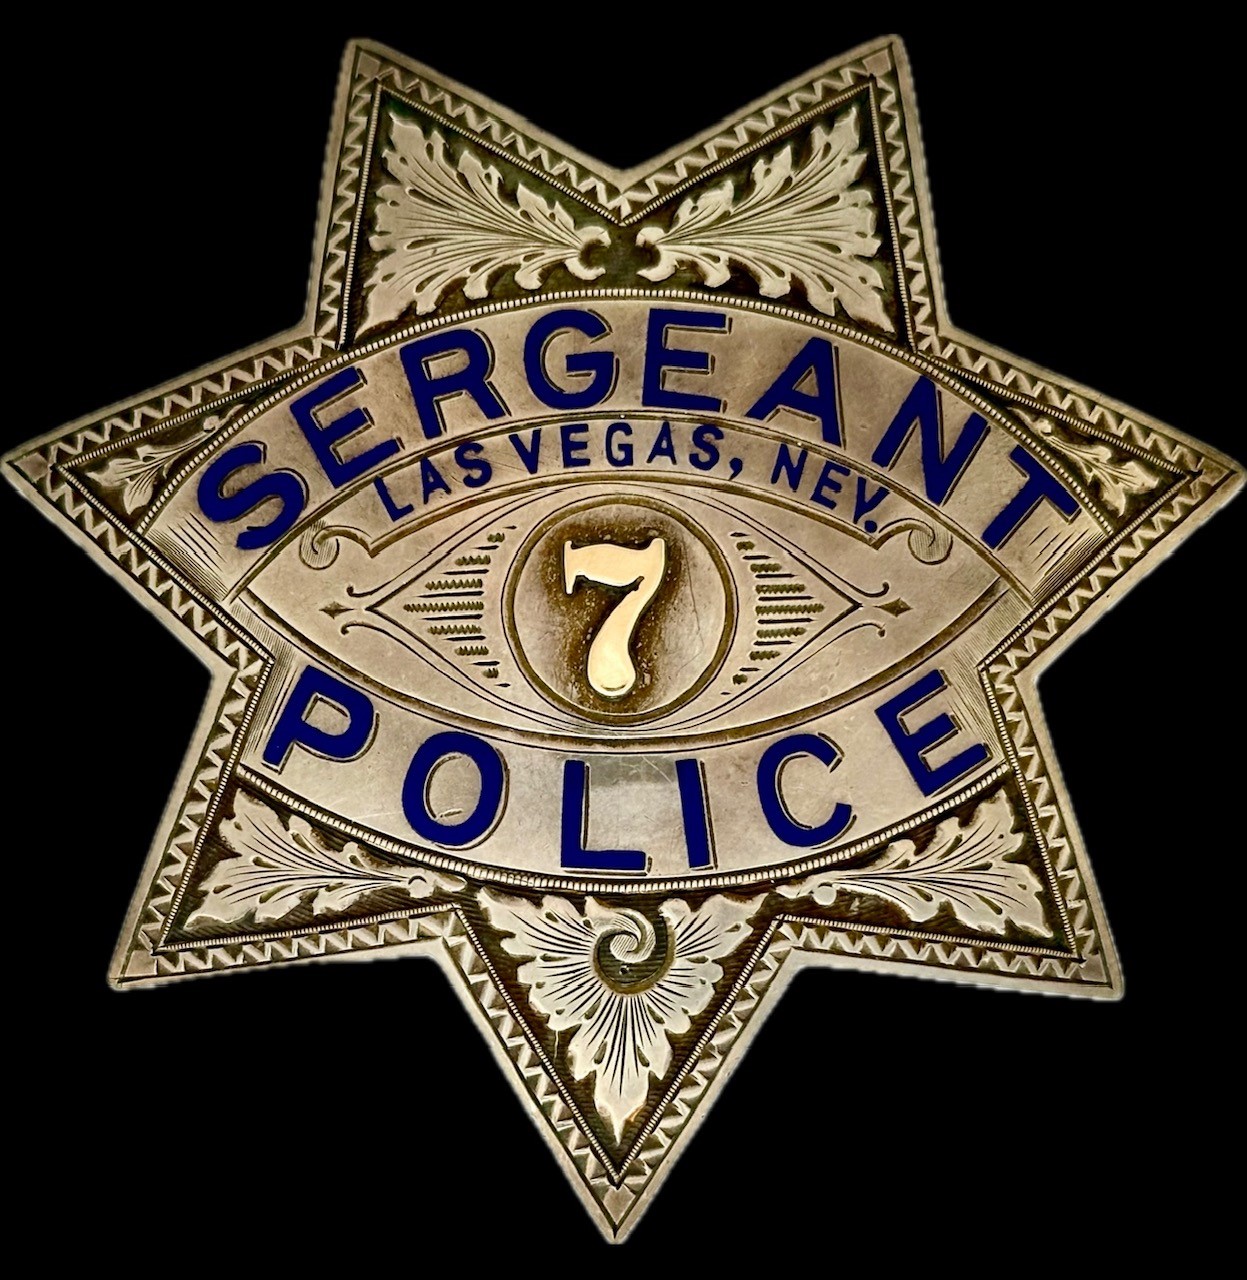 City of Las Vegas Police Sergeant badge #7, worn by Archie Wells, made of sterling silver  by Irvine & Jachens S. F.  and has the International Jewelry Workers Union No. 64 stamp.